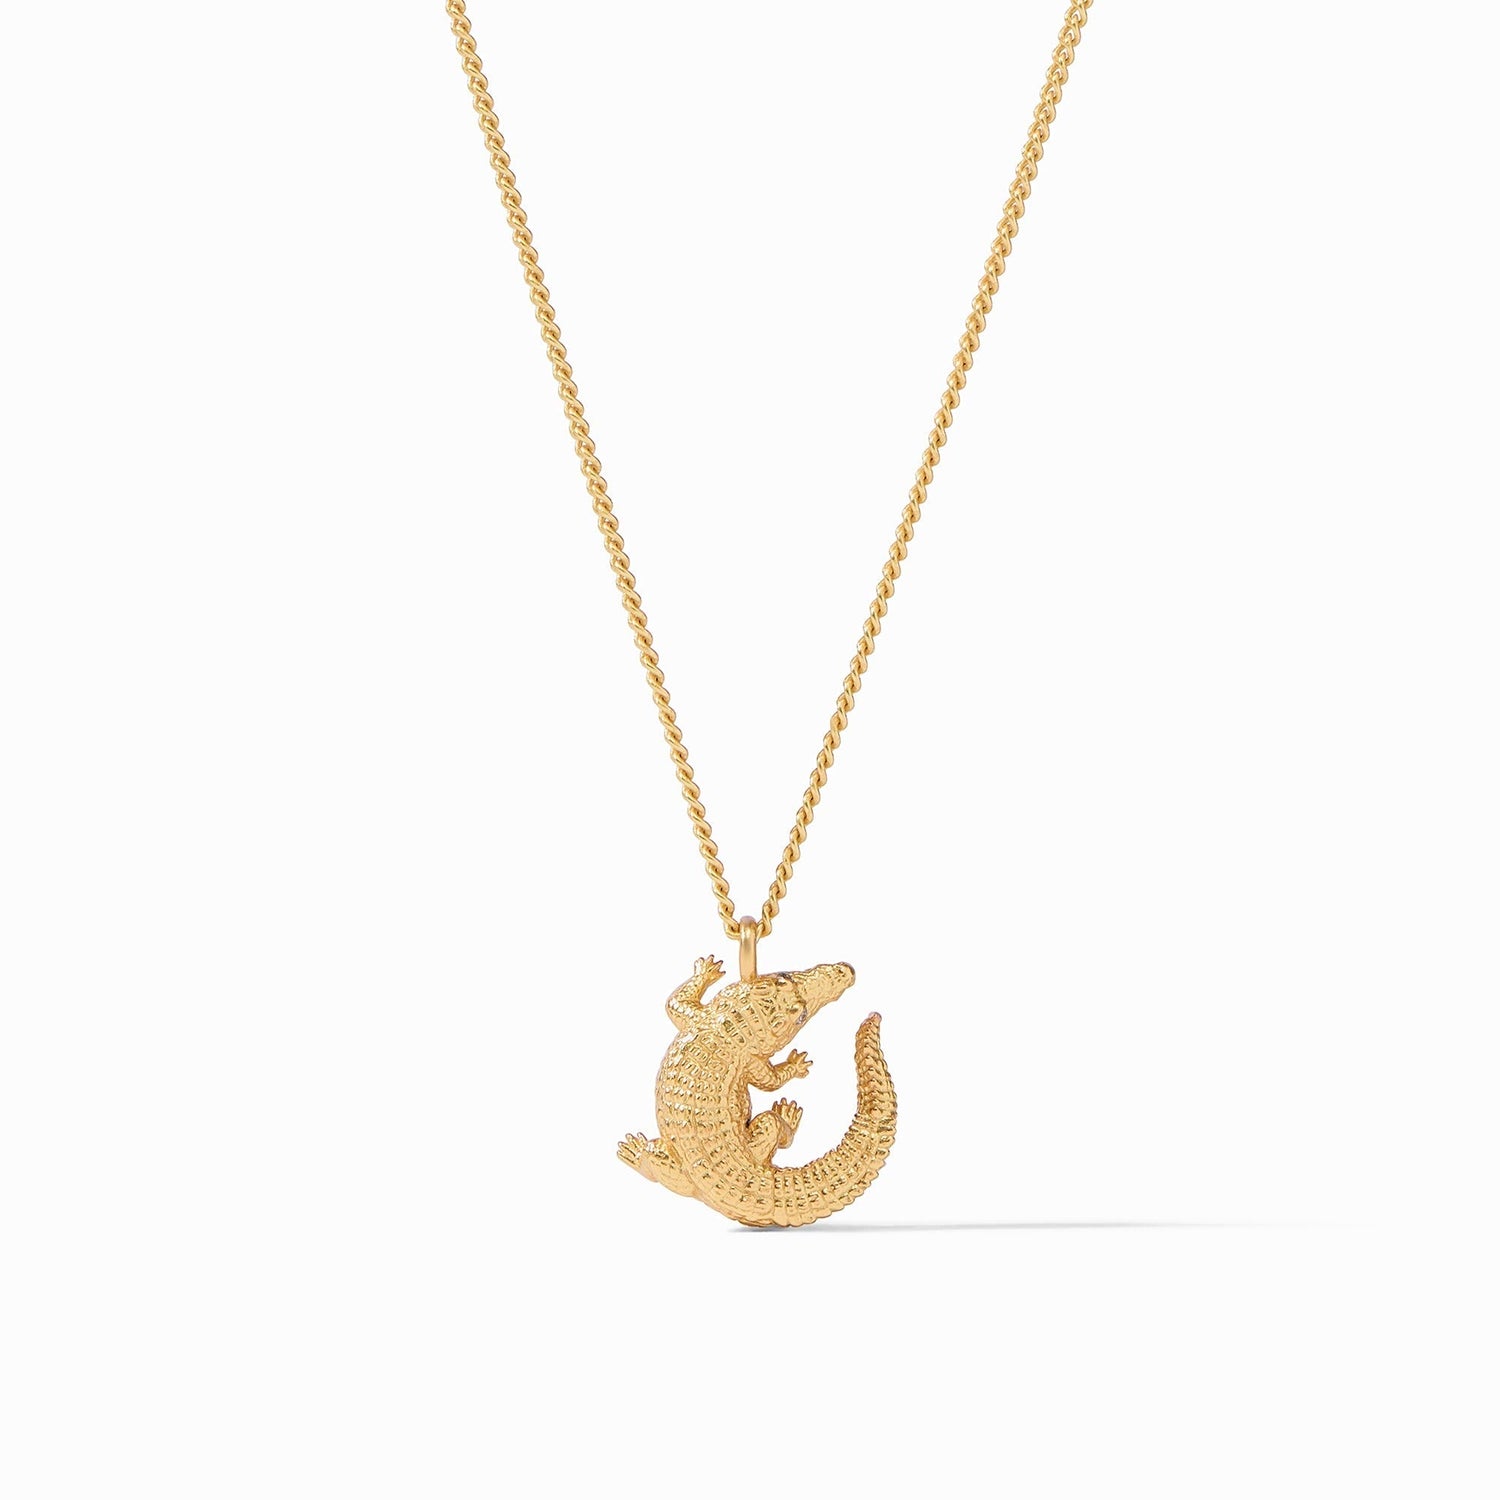 Alligator Gold Solitaire Necklace - Gaines Jewelers